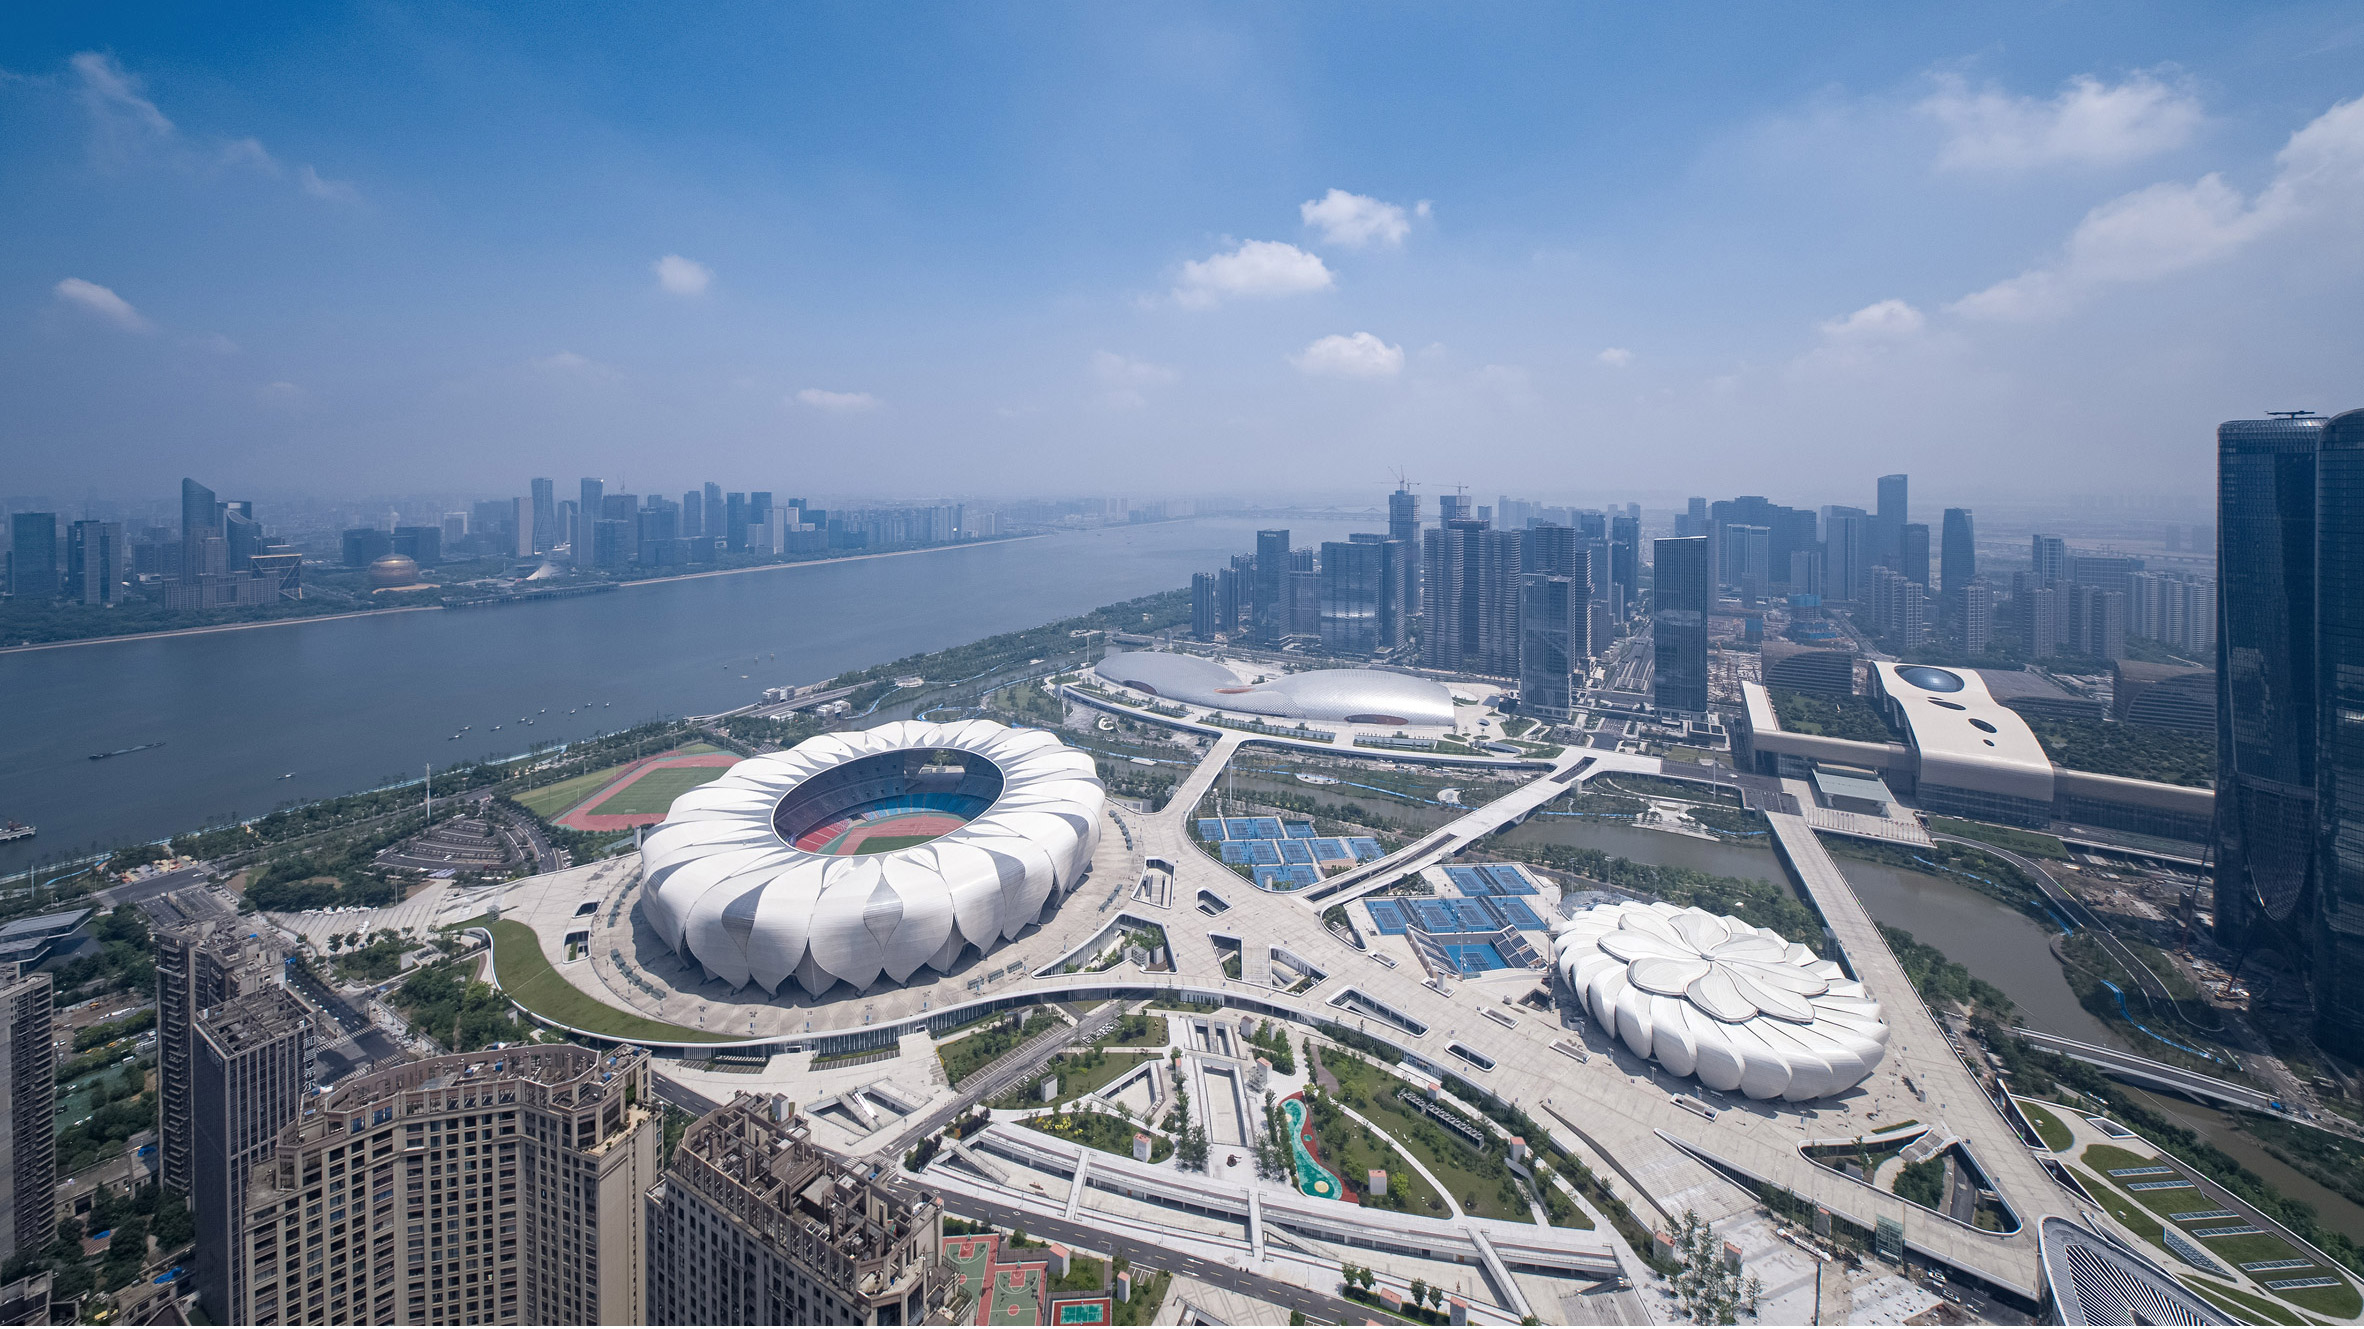 Eight stadiums built for the 2022 Hangzhou Asian Games